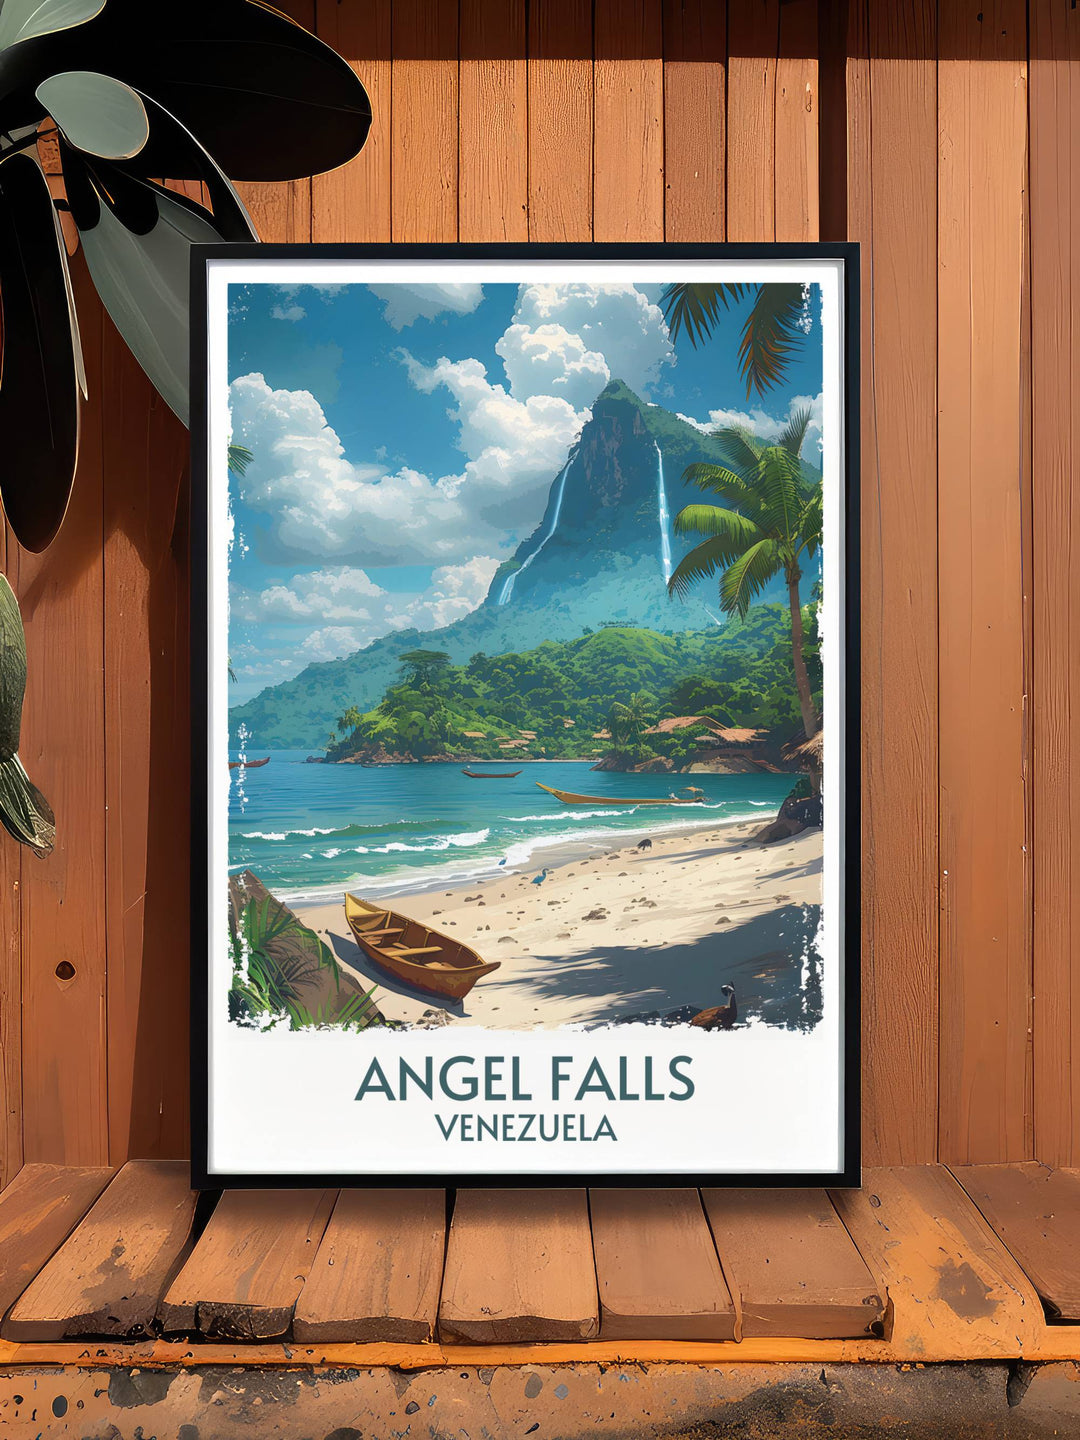 Bring the wonder of Angel Falls Canaima National Park into your home with this high quality framed print, capturing the essence of Venezuela’s natural beauty.